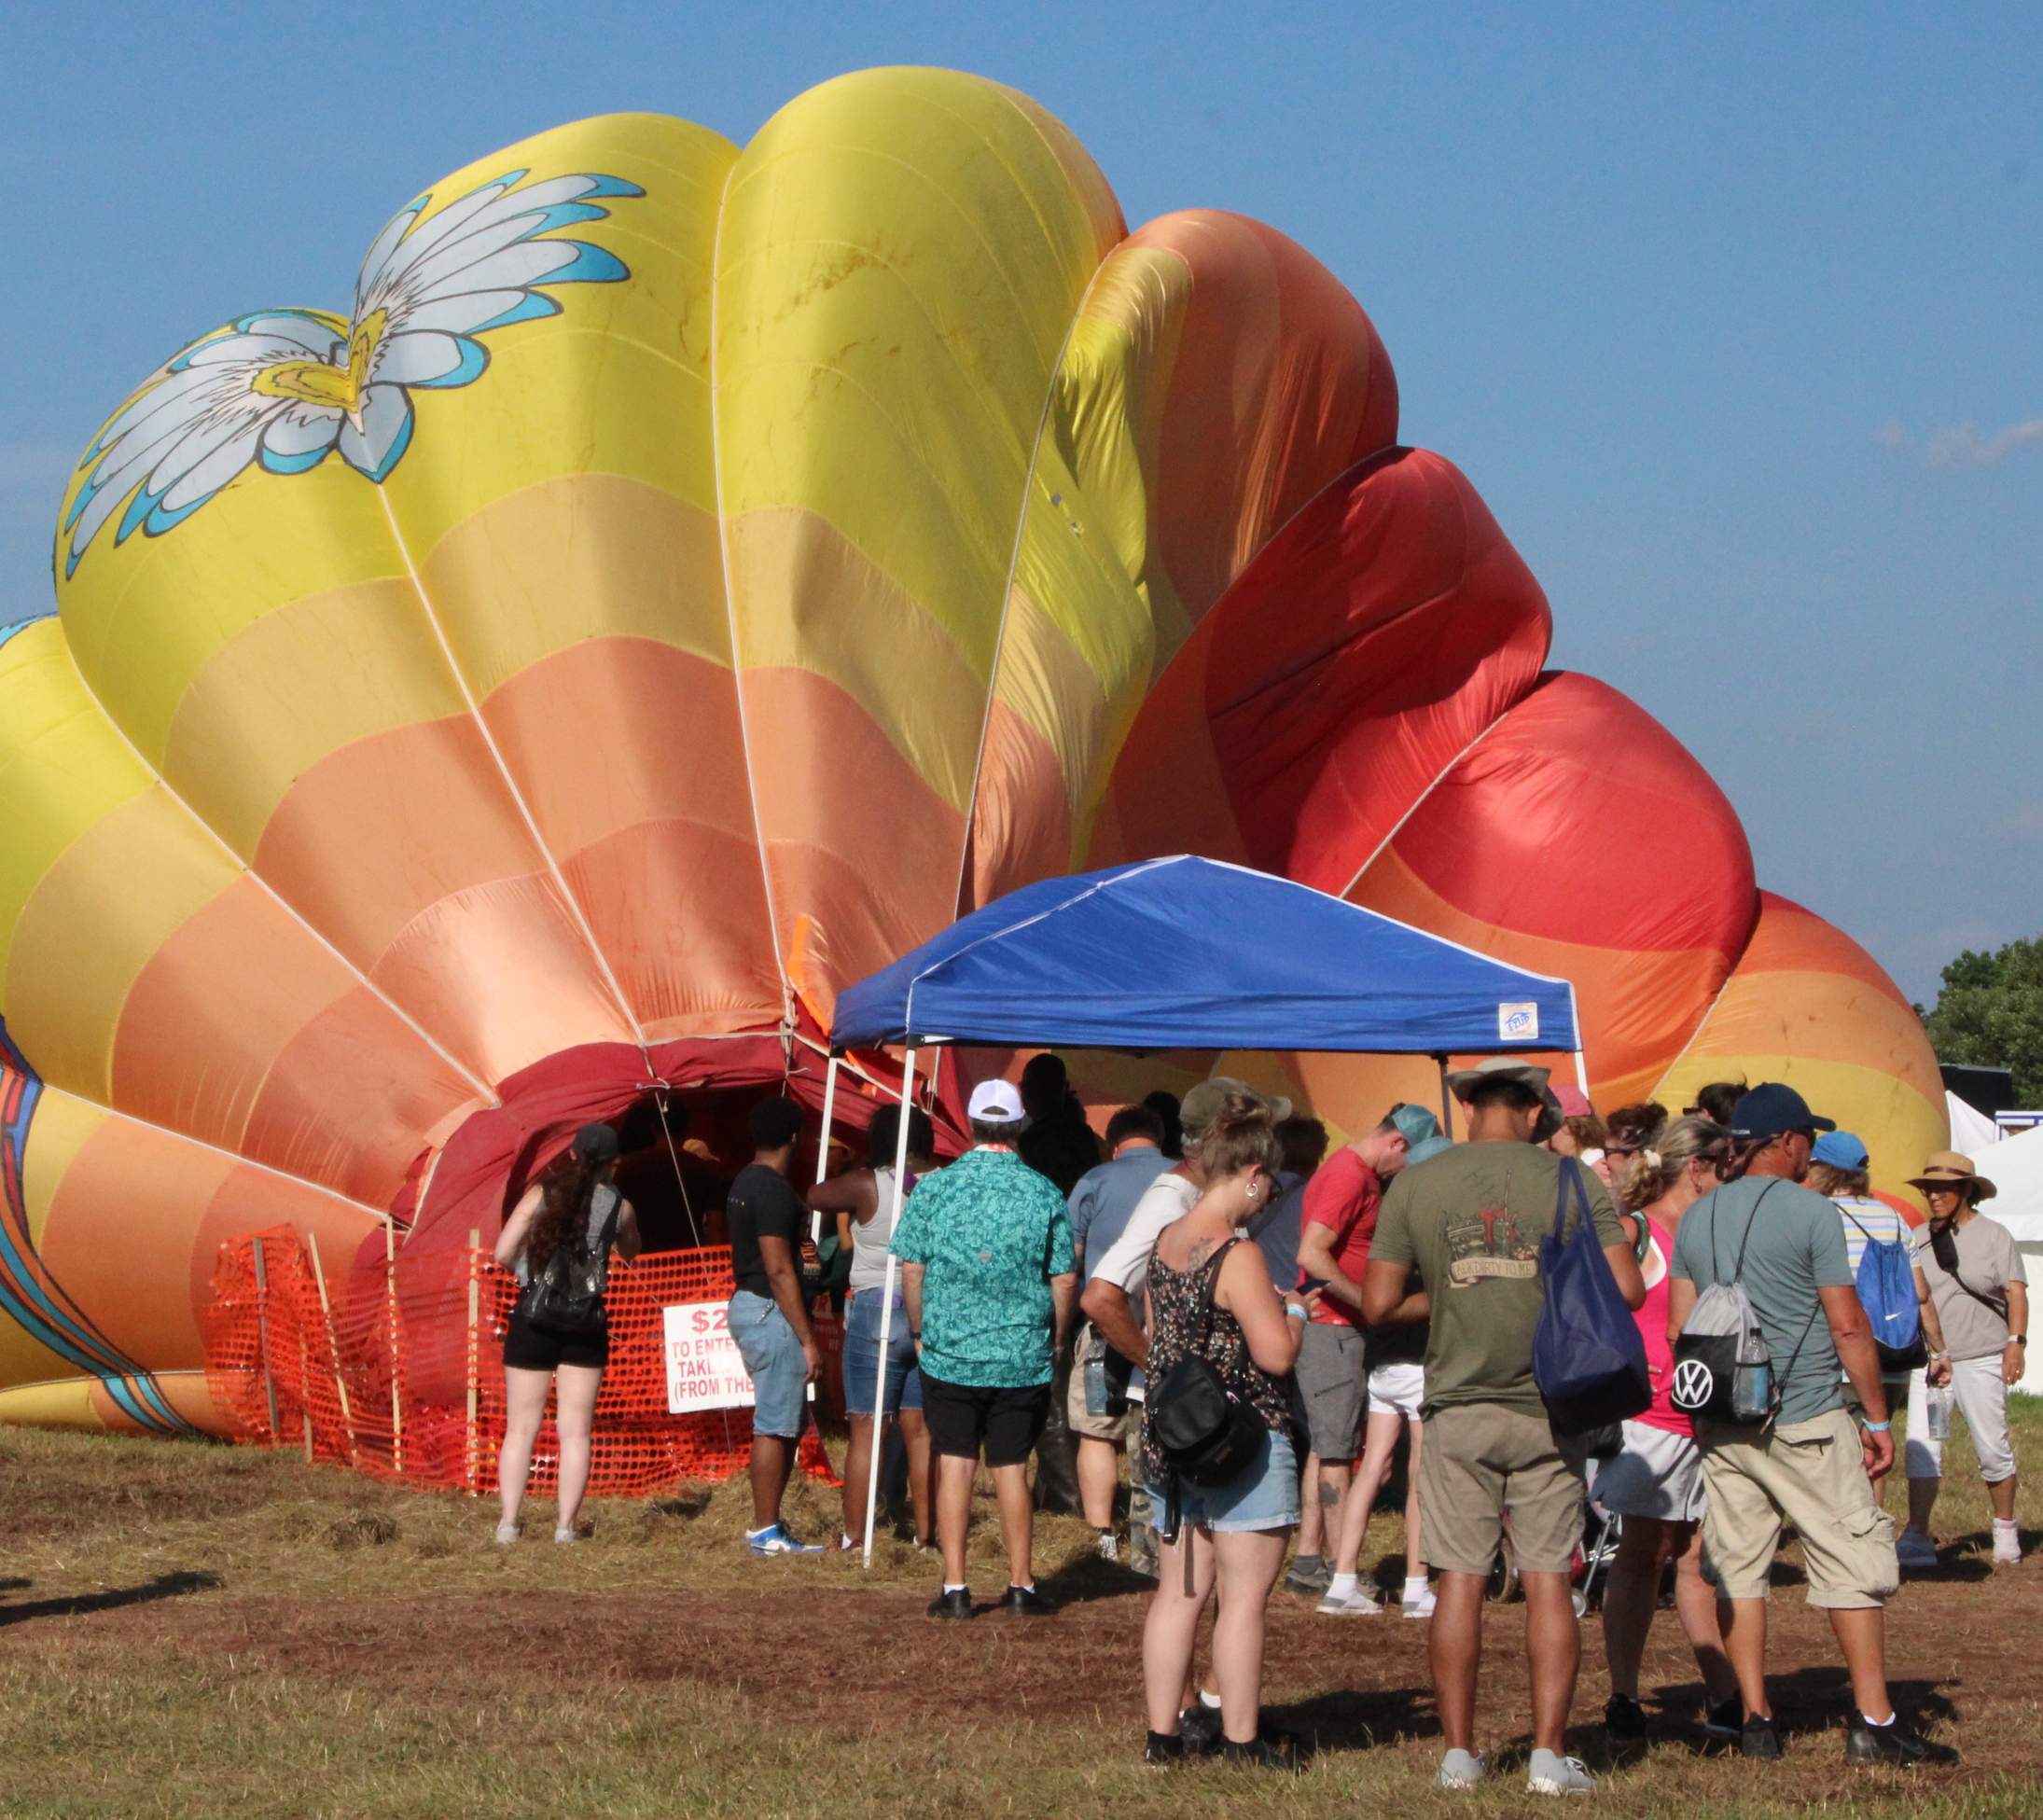 Storms Pop Ballooning Hopes at New Jersey Festival